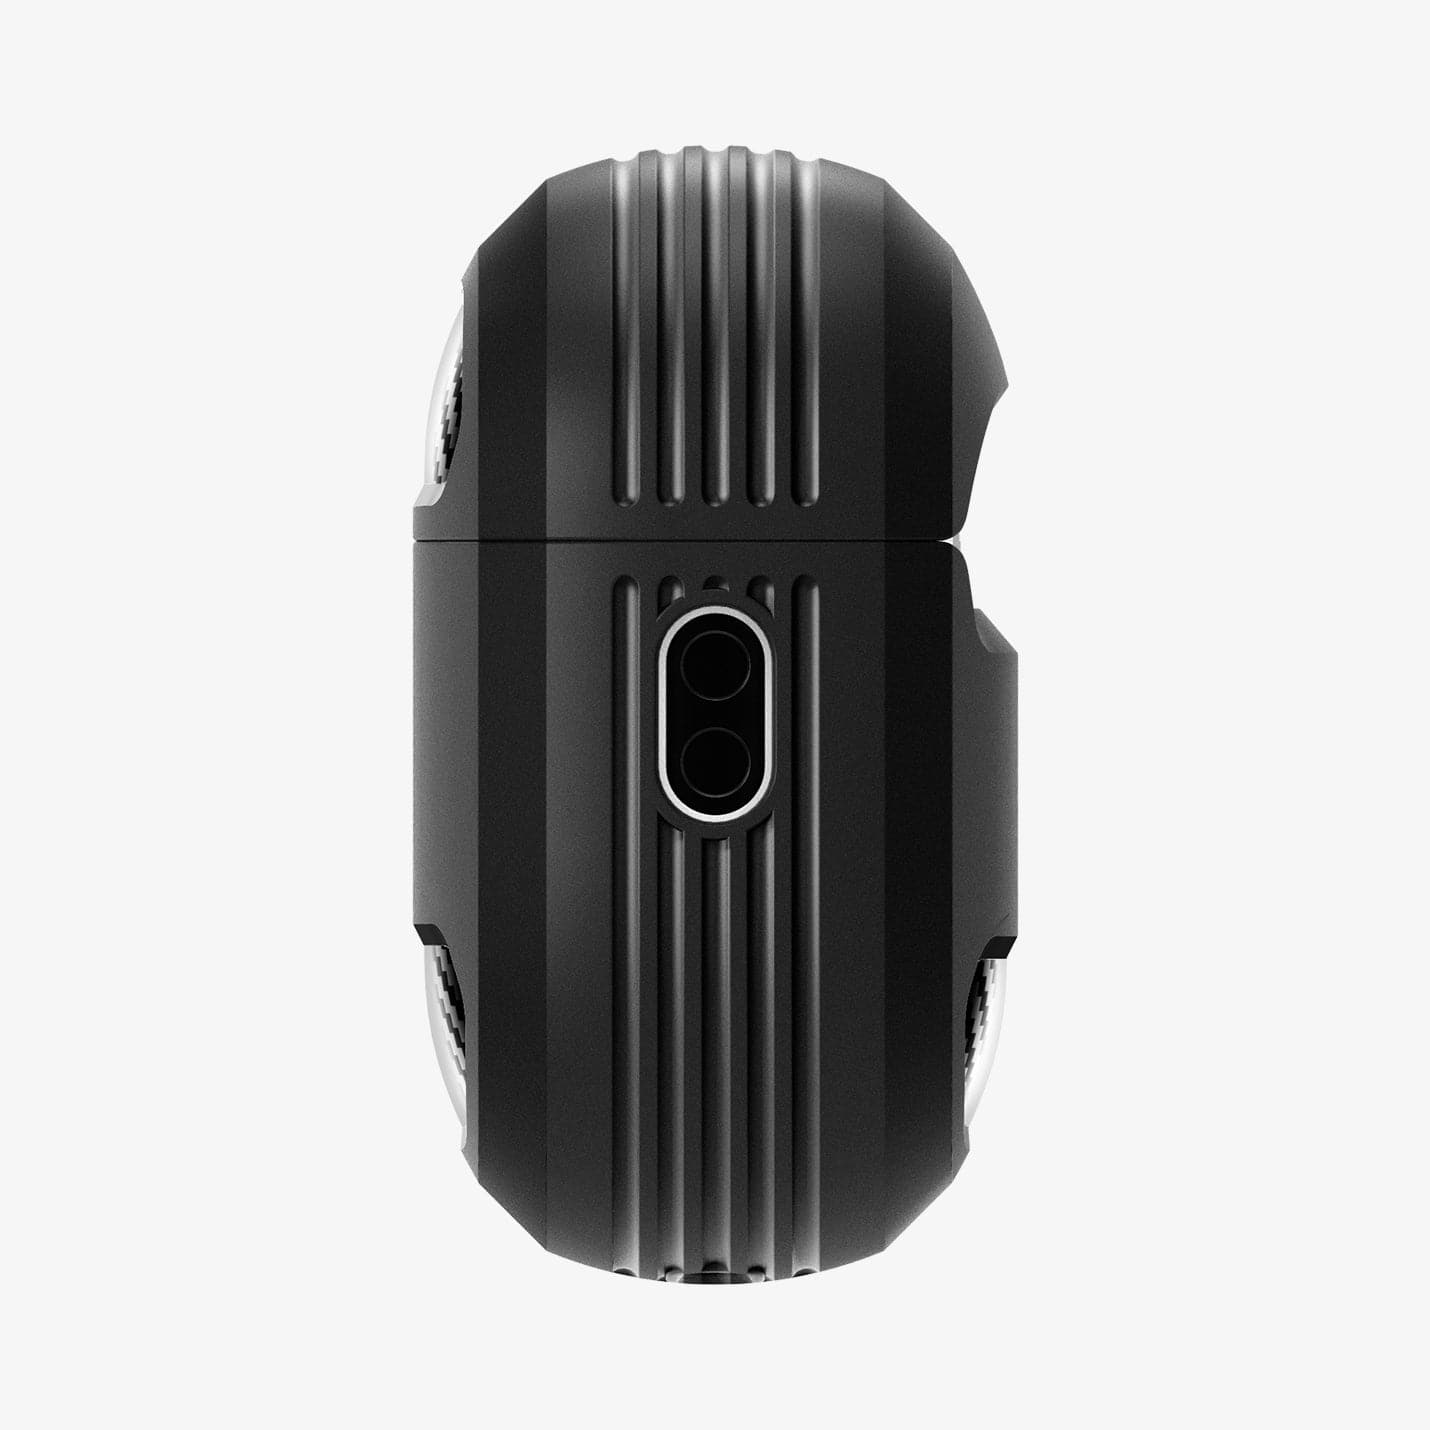 ACS05482 - Apple AirPods Pro 2 Case Rugged Armor in matte black showing the side